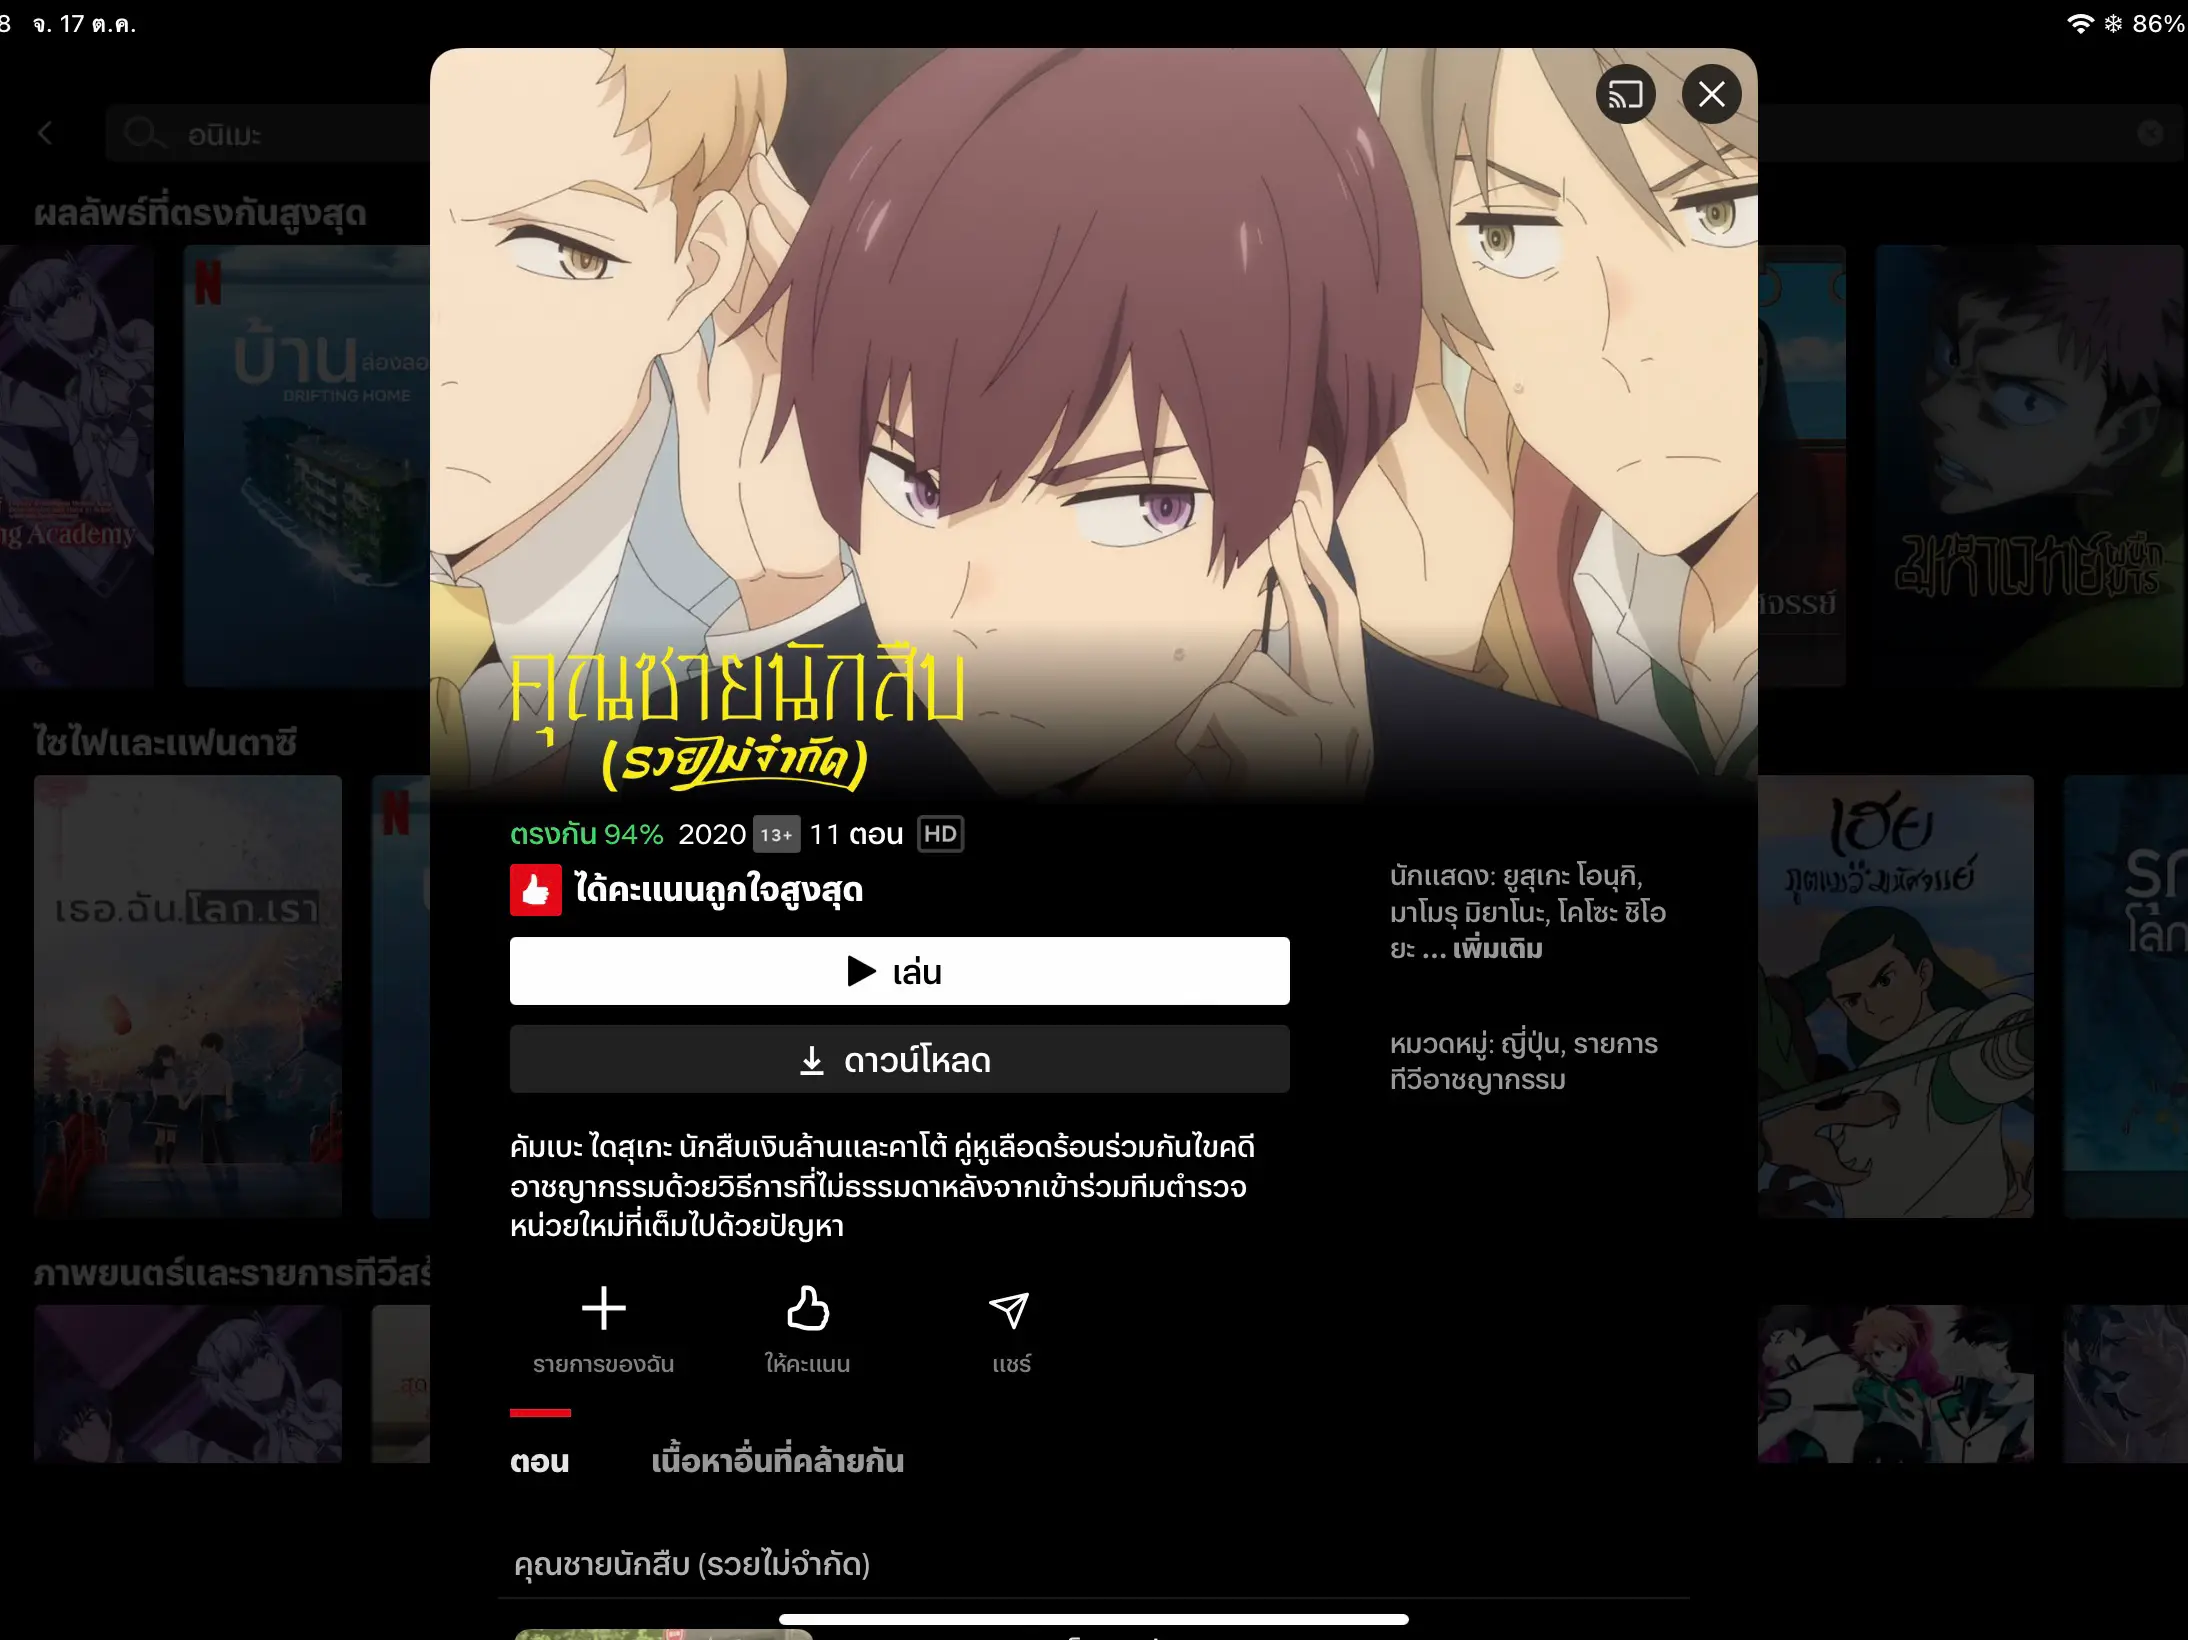 Introducing Anime on Netflix Don't Miss!, Gallery posted by Nutji